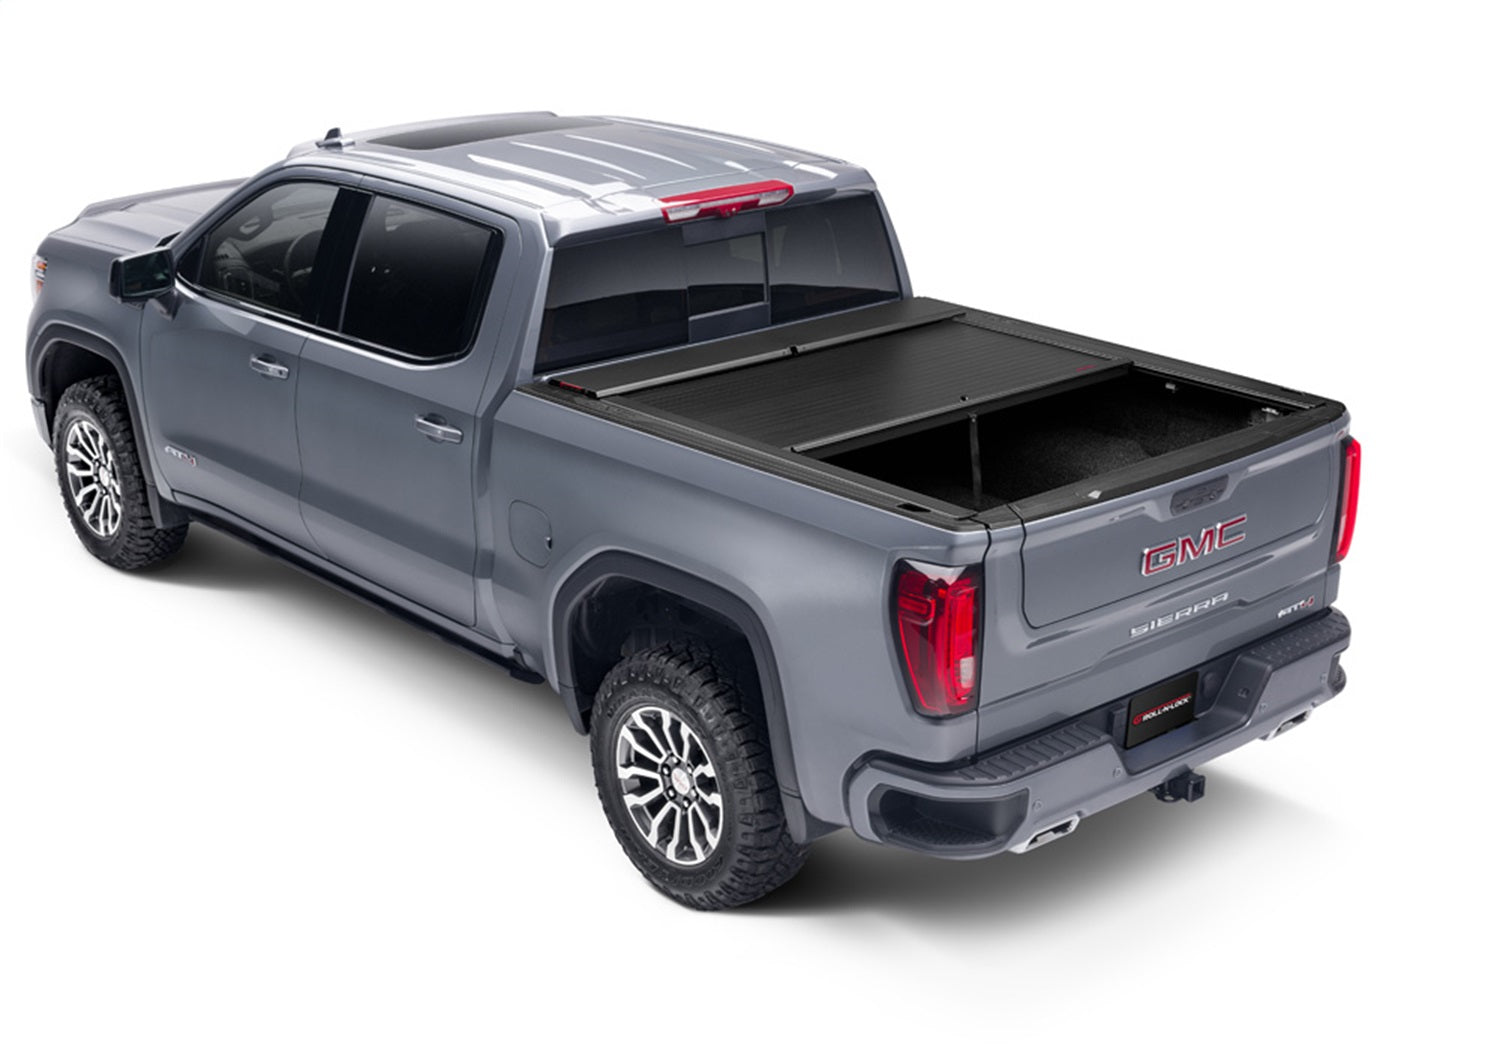 Roll-N-Lock BT261A Roll-N-Lock A-Series Truck Bed Cover Fits Canyon Colorado